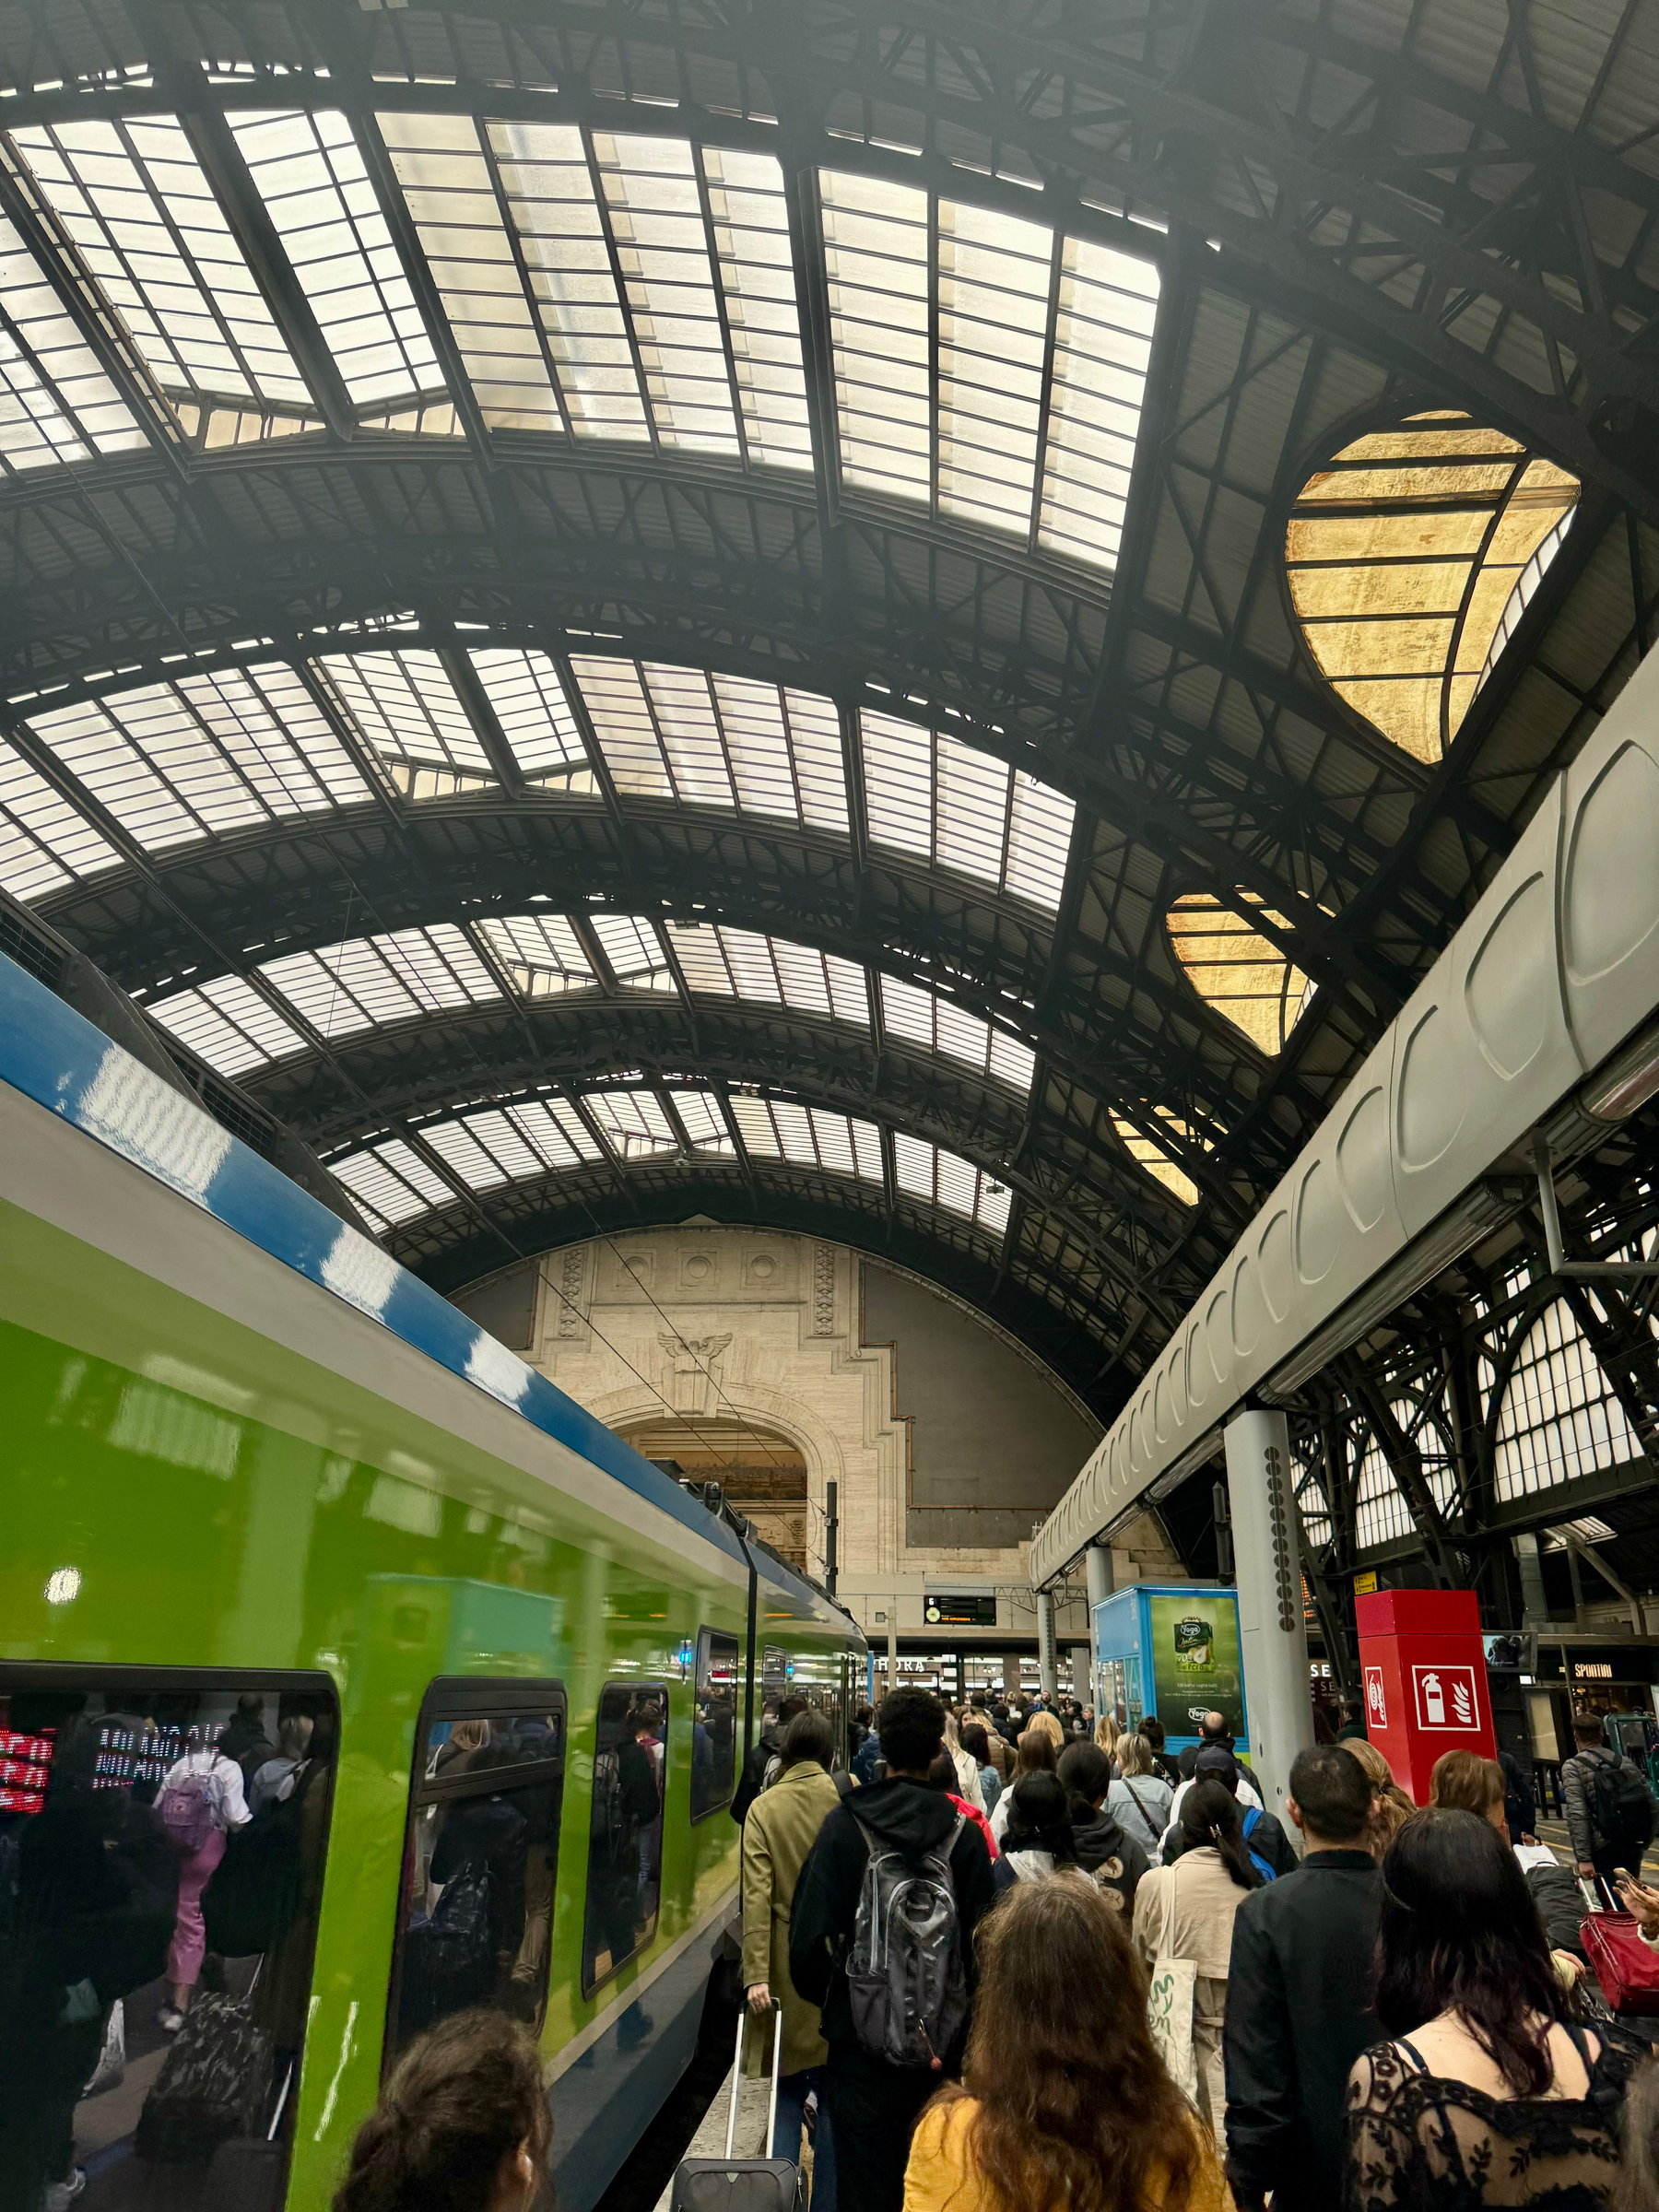 Crowded train station with passengers waiting on the platform. An electric train with green and blue coloring is parked. The station features a high, arched glass roof and intricate architectural details on the wall. 